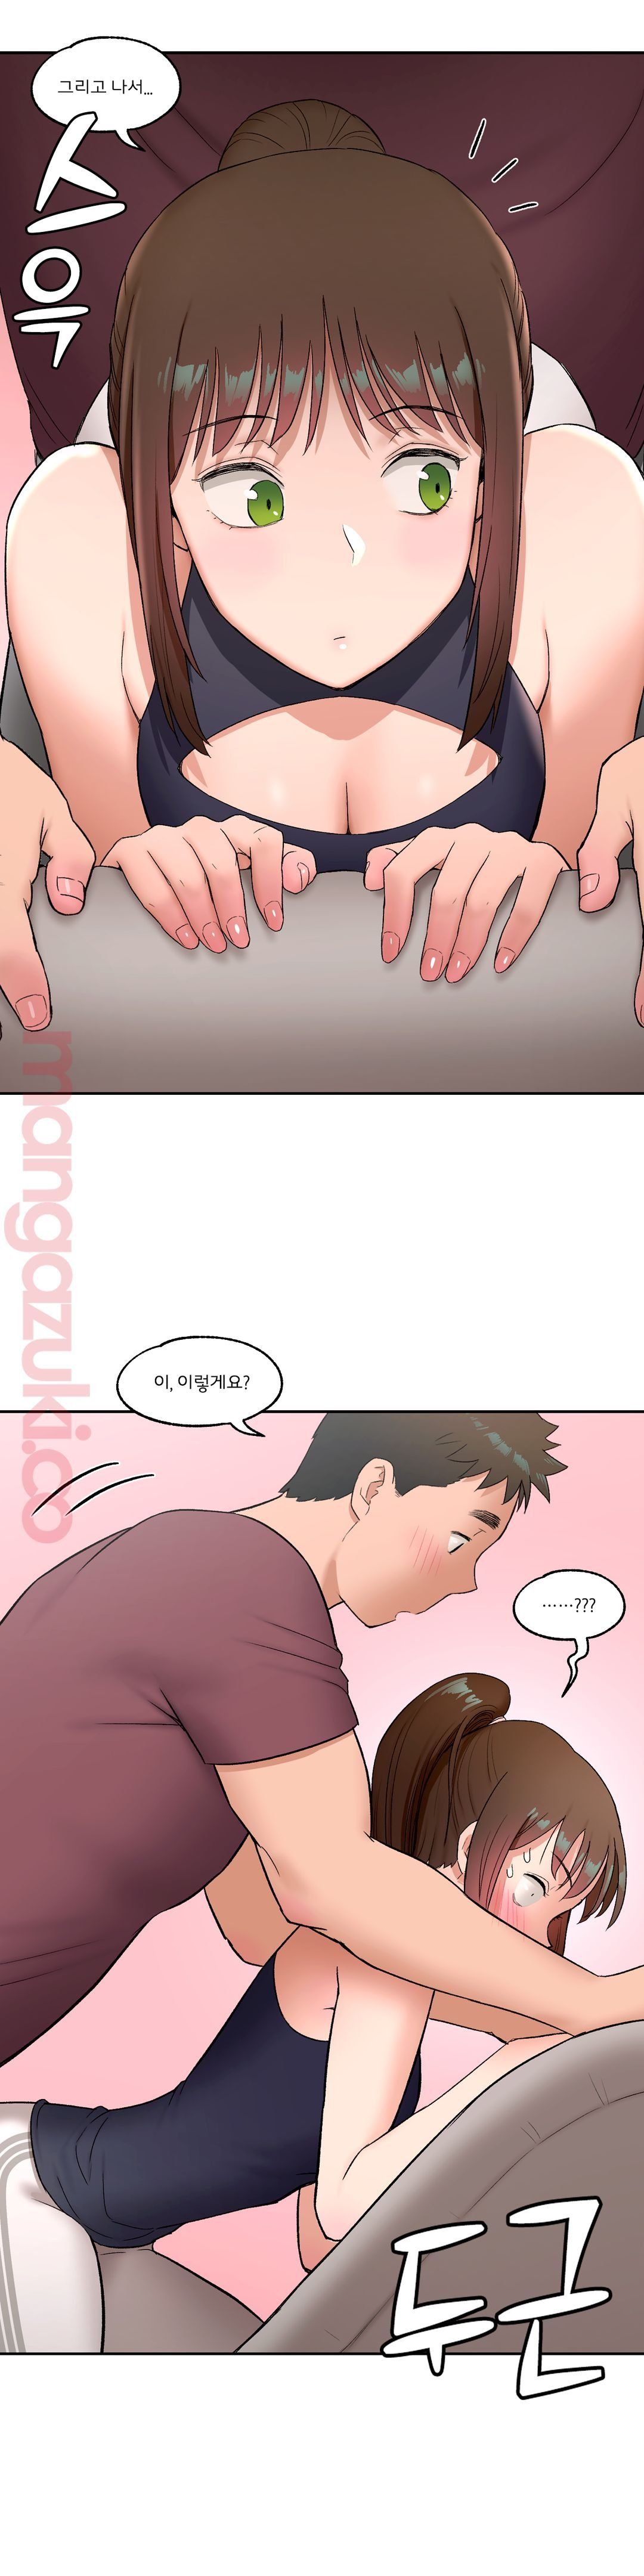 Sexercise Raw - Chapter 42 Page 5